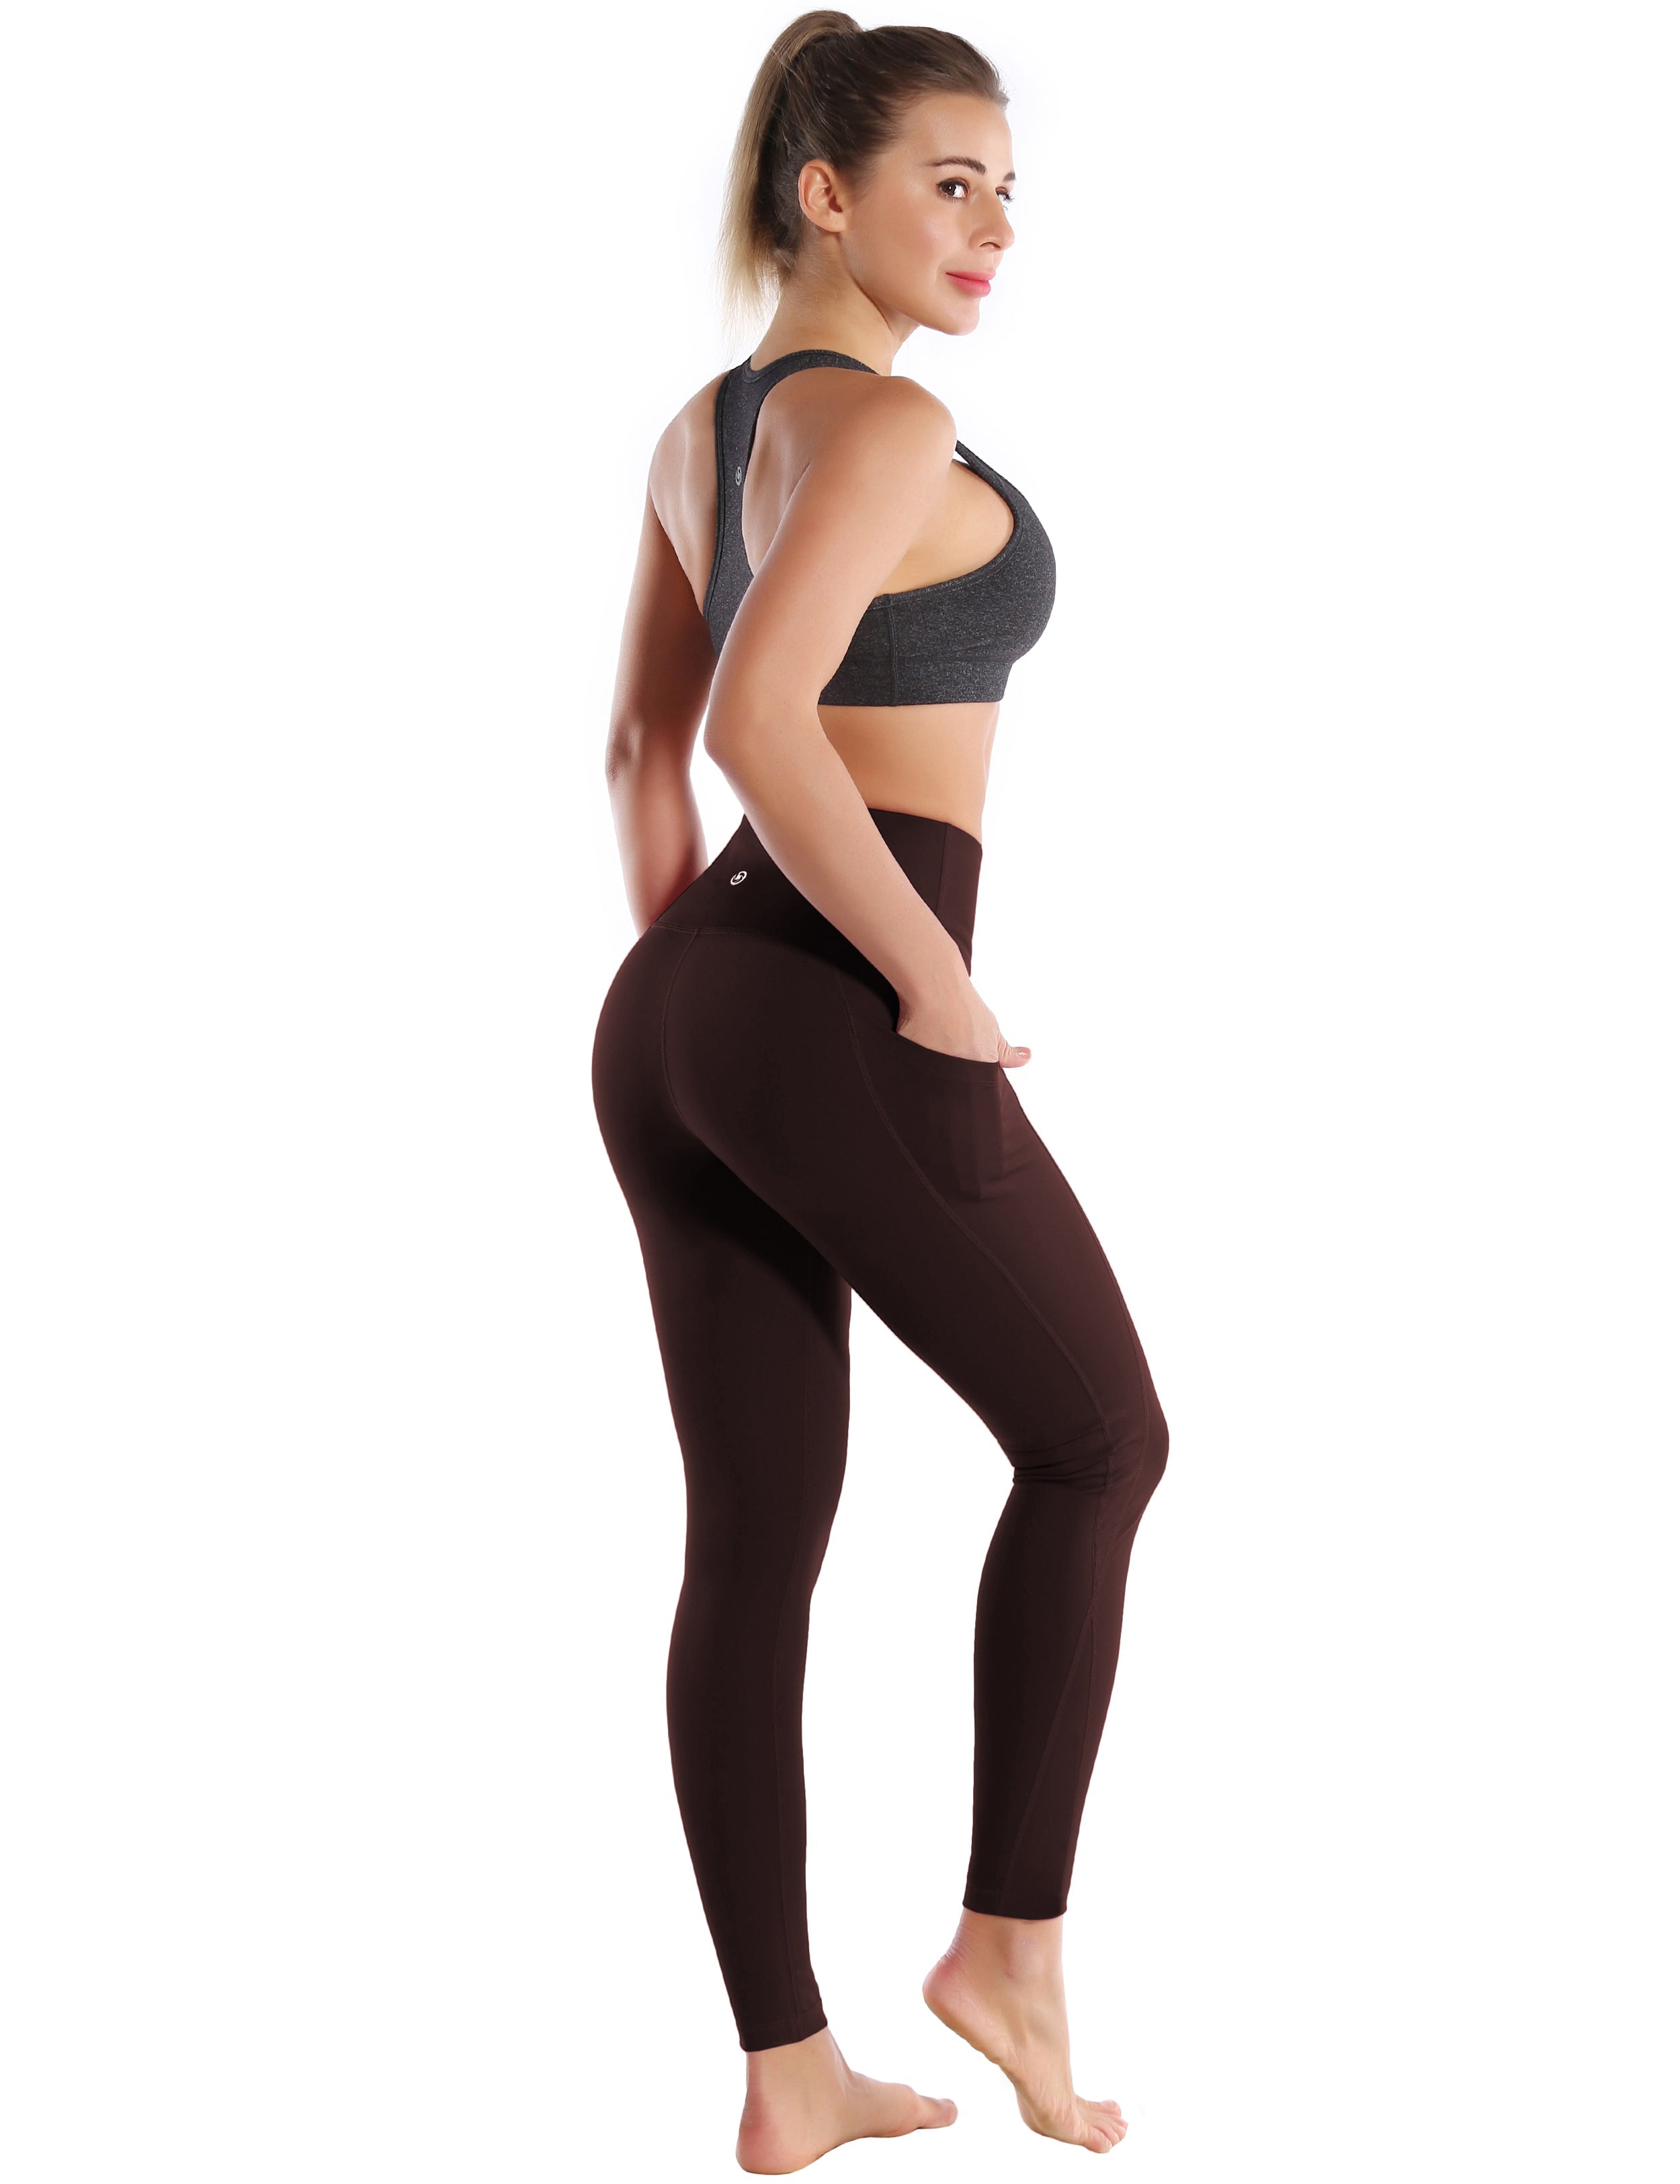 High Waist Side Pockets Running Pants mahoganymaroon 75% Nylon, 25% Spandex Fabric doesn't attract lint easily 4-way stretch No see-through Moisture-wicking Tummy control Inner pocket